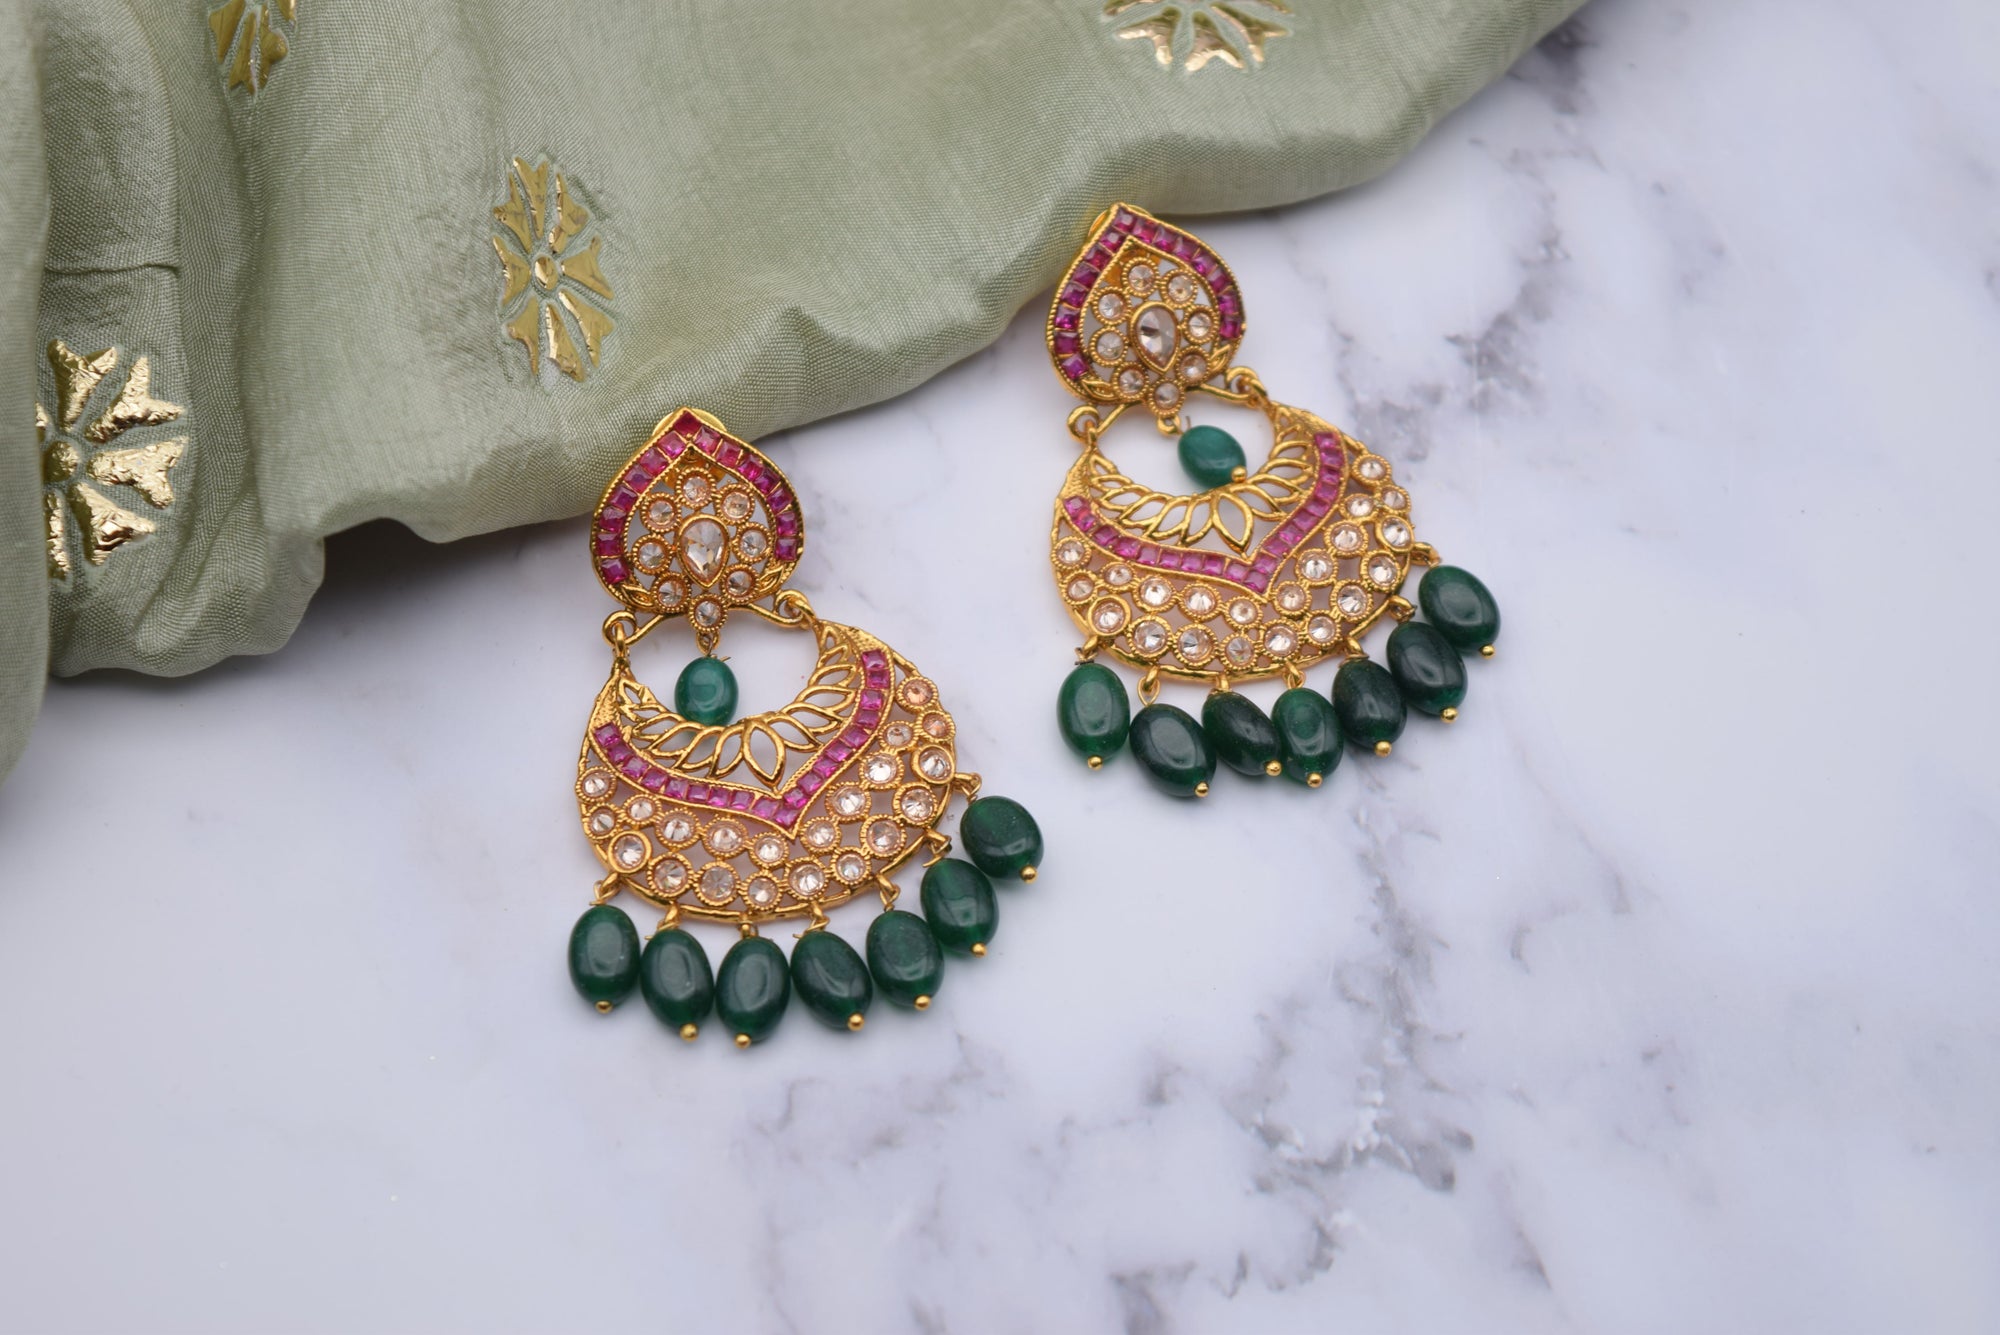 Indian Jewelry - Multicolored Polki Earring Set with Green Beads and Rani Stones